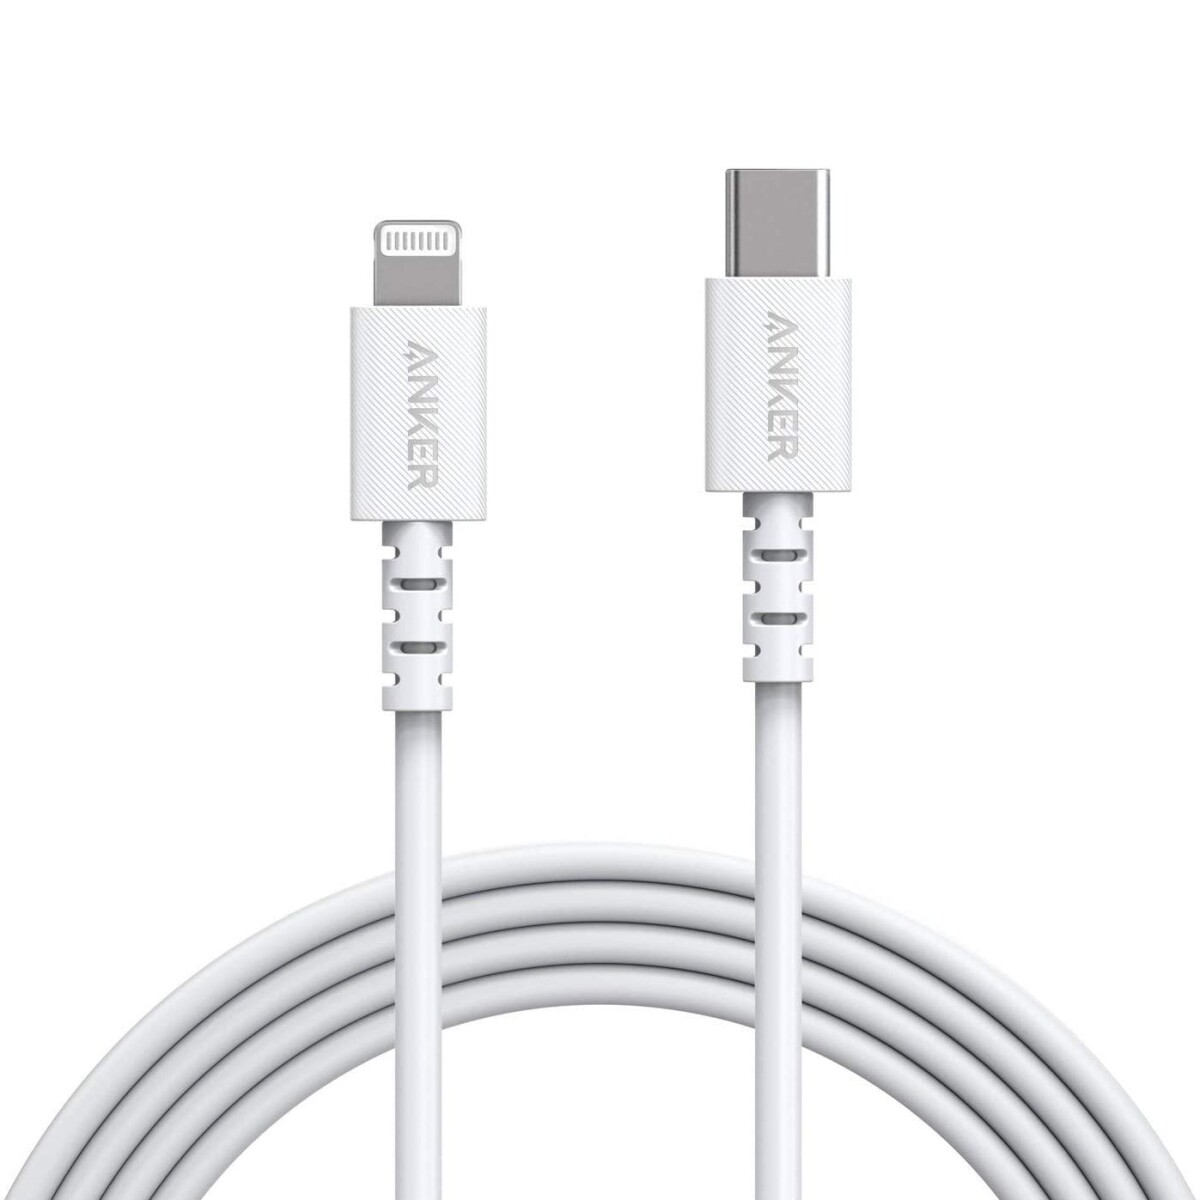 Cable anker powerline select usb-c a lightning 1.8m Blanco